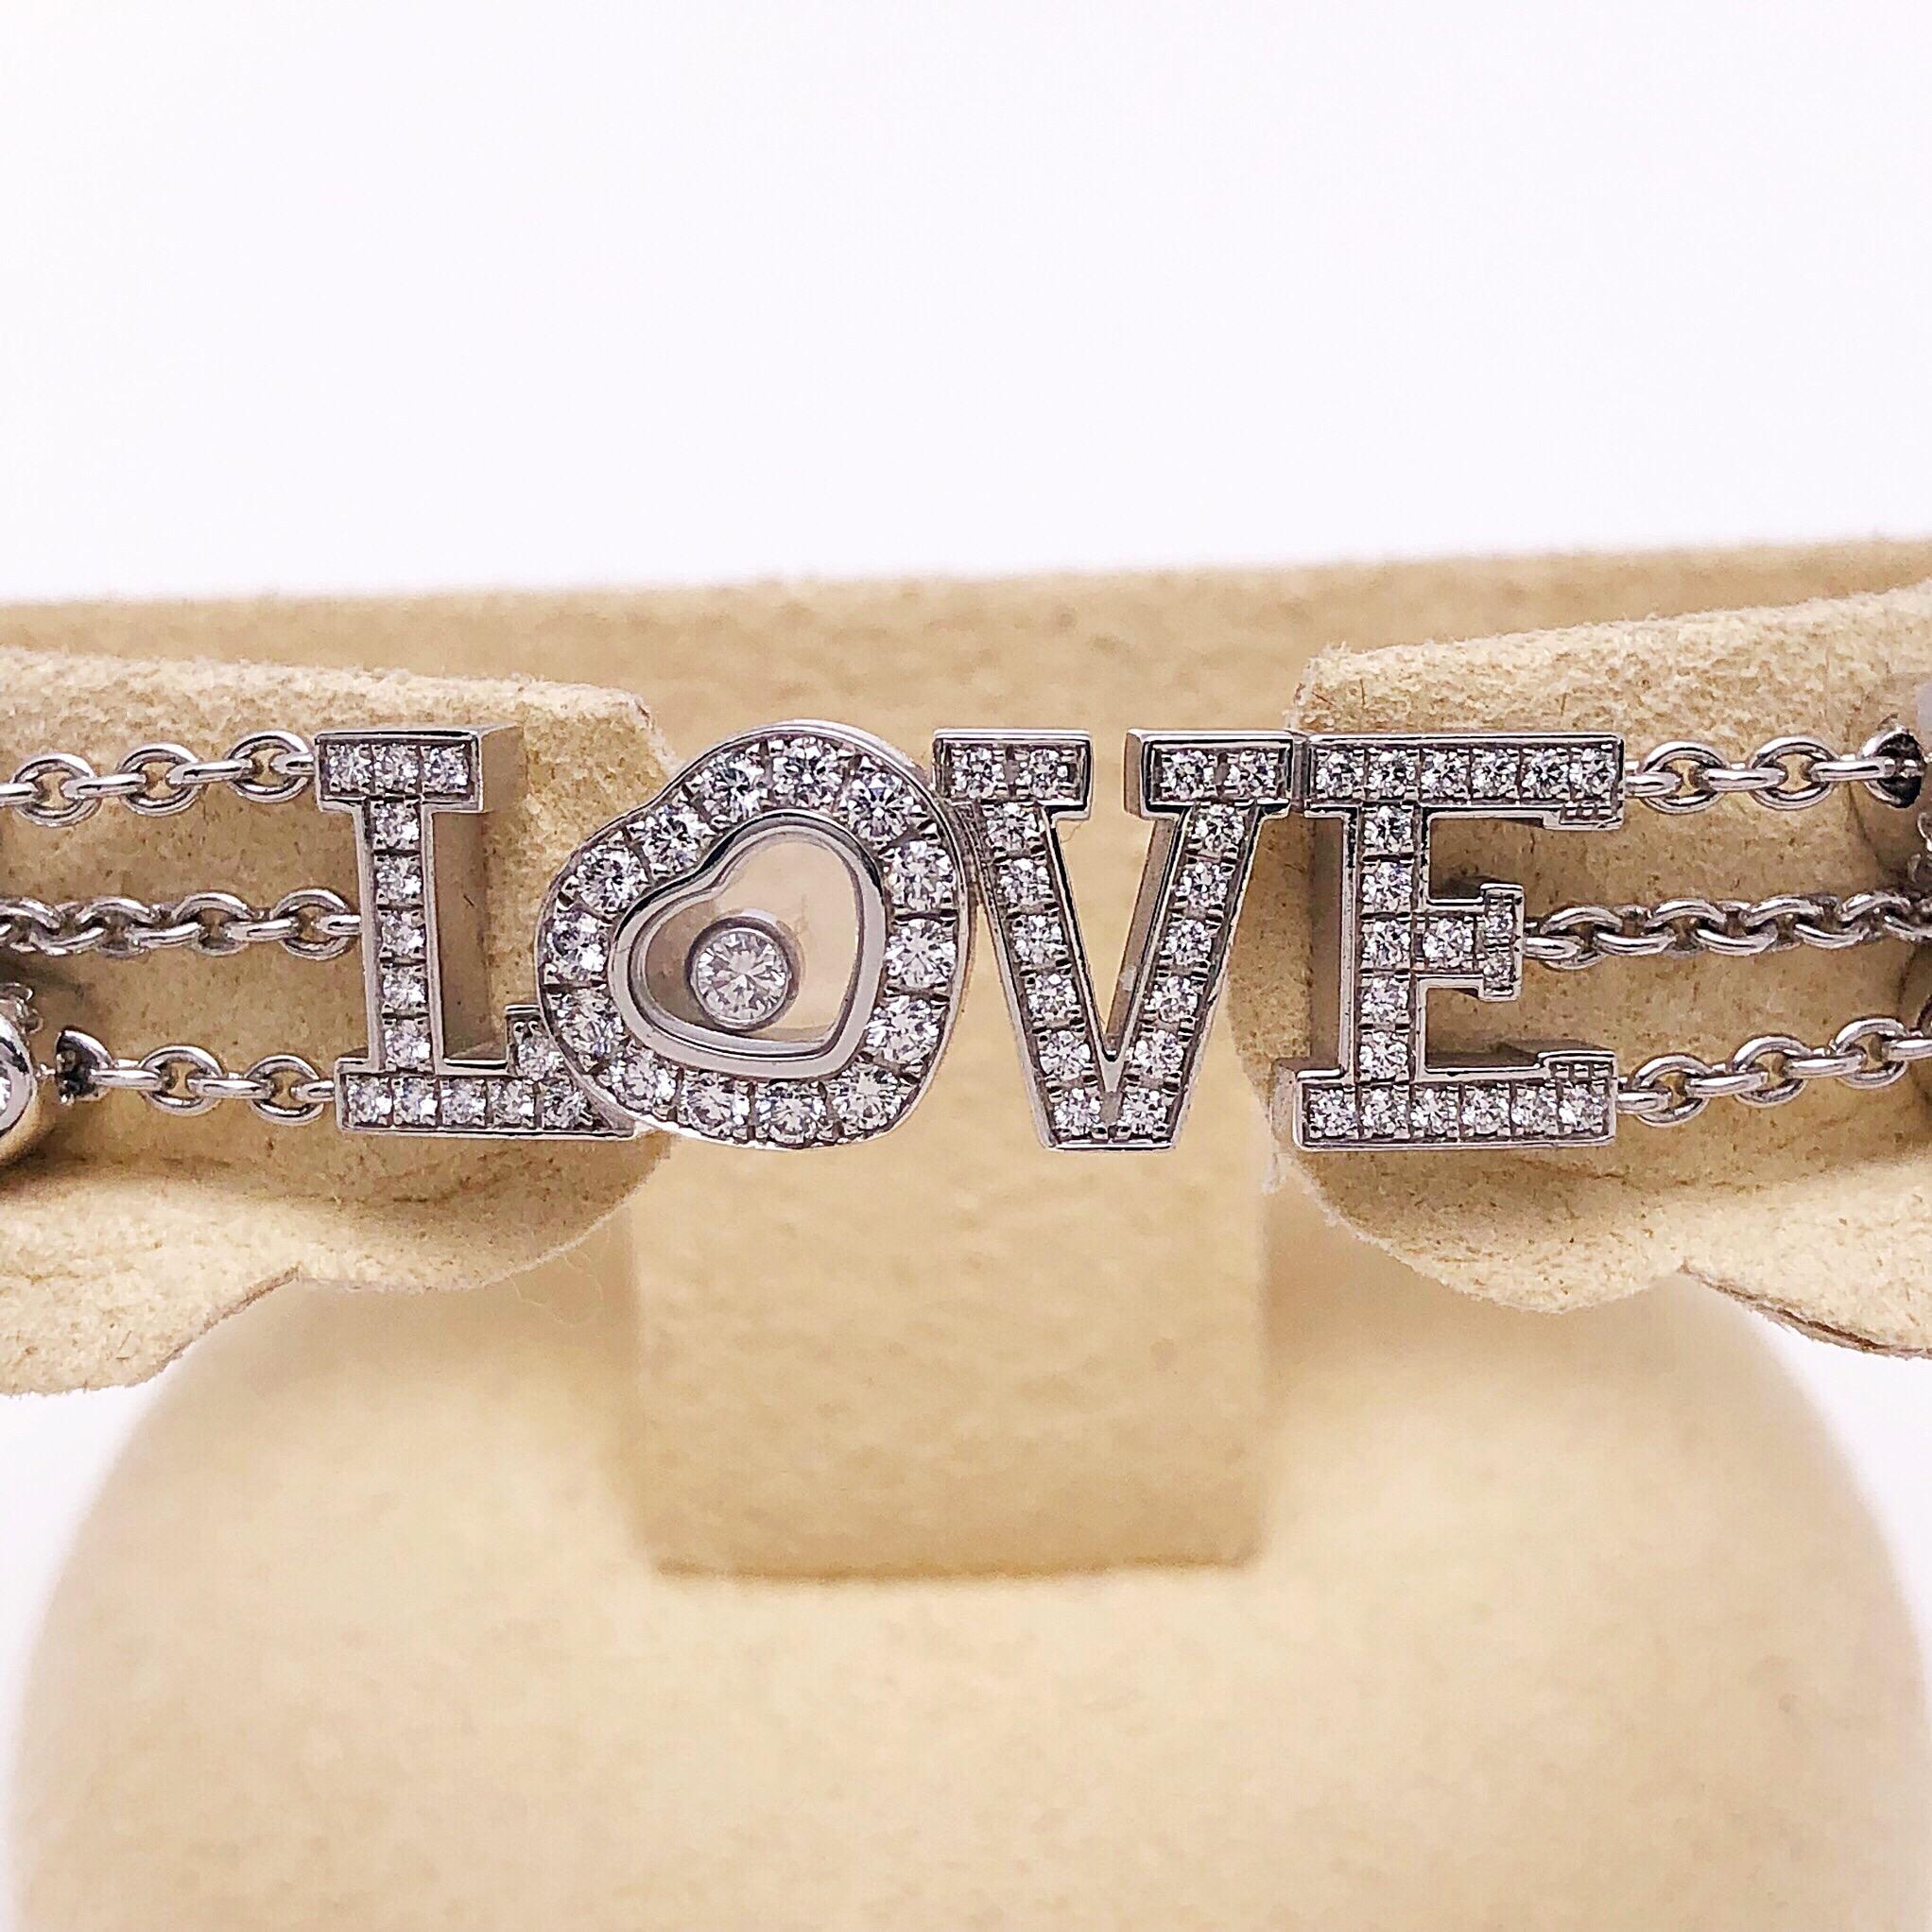 Designed by Chopard ,this bracelet features a full diamond center LOVE along with three chains sprinkled with 10 diamond hearts. A single floating diamond is in the center of the heart shaped letter O. There are 95 diamonds with a total diamond